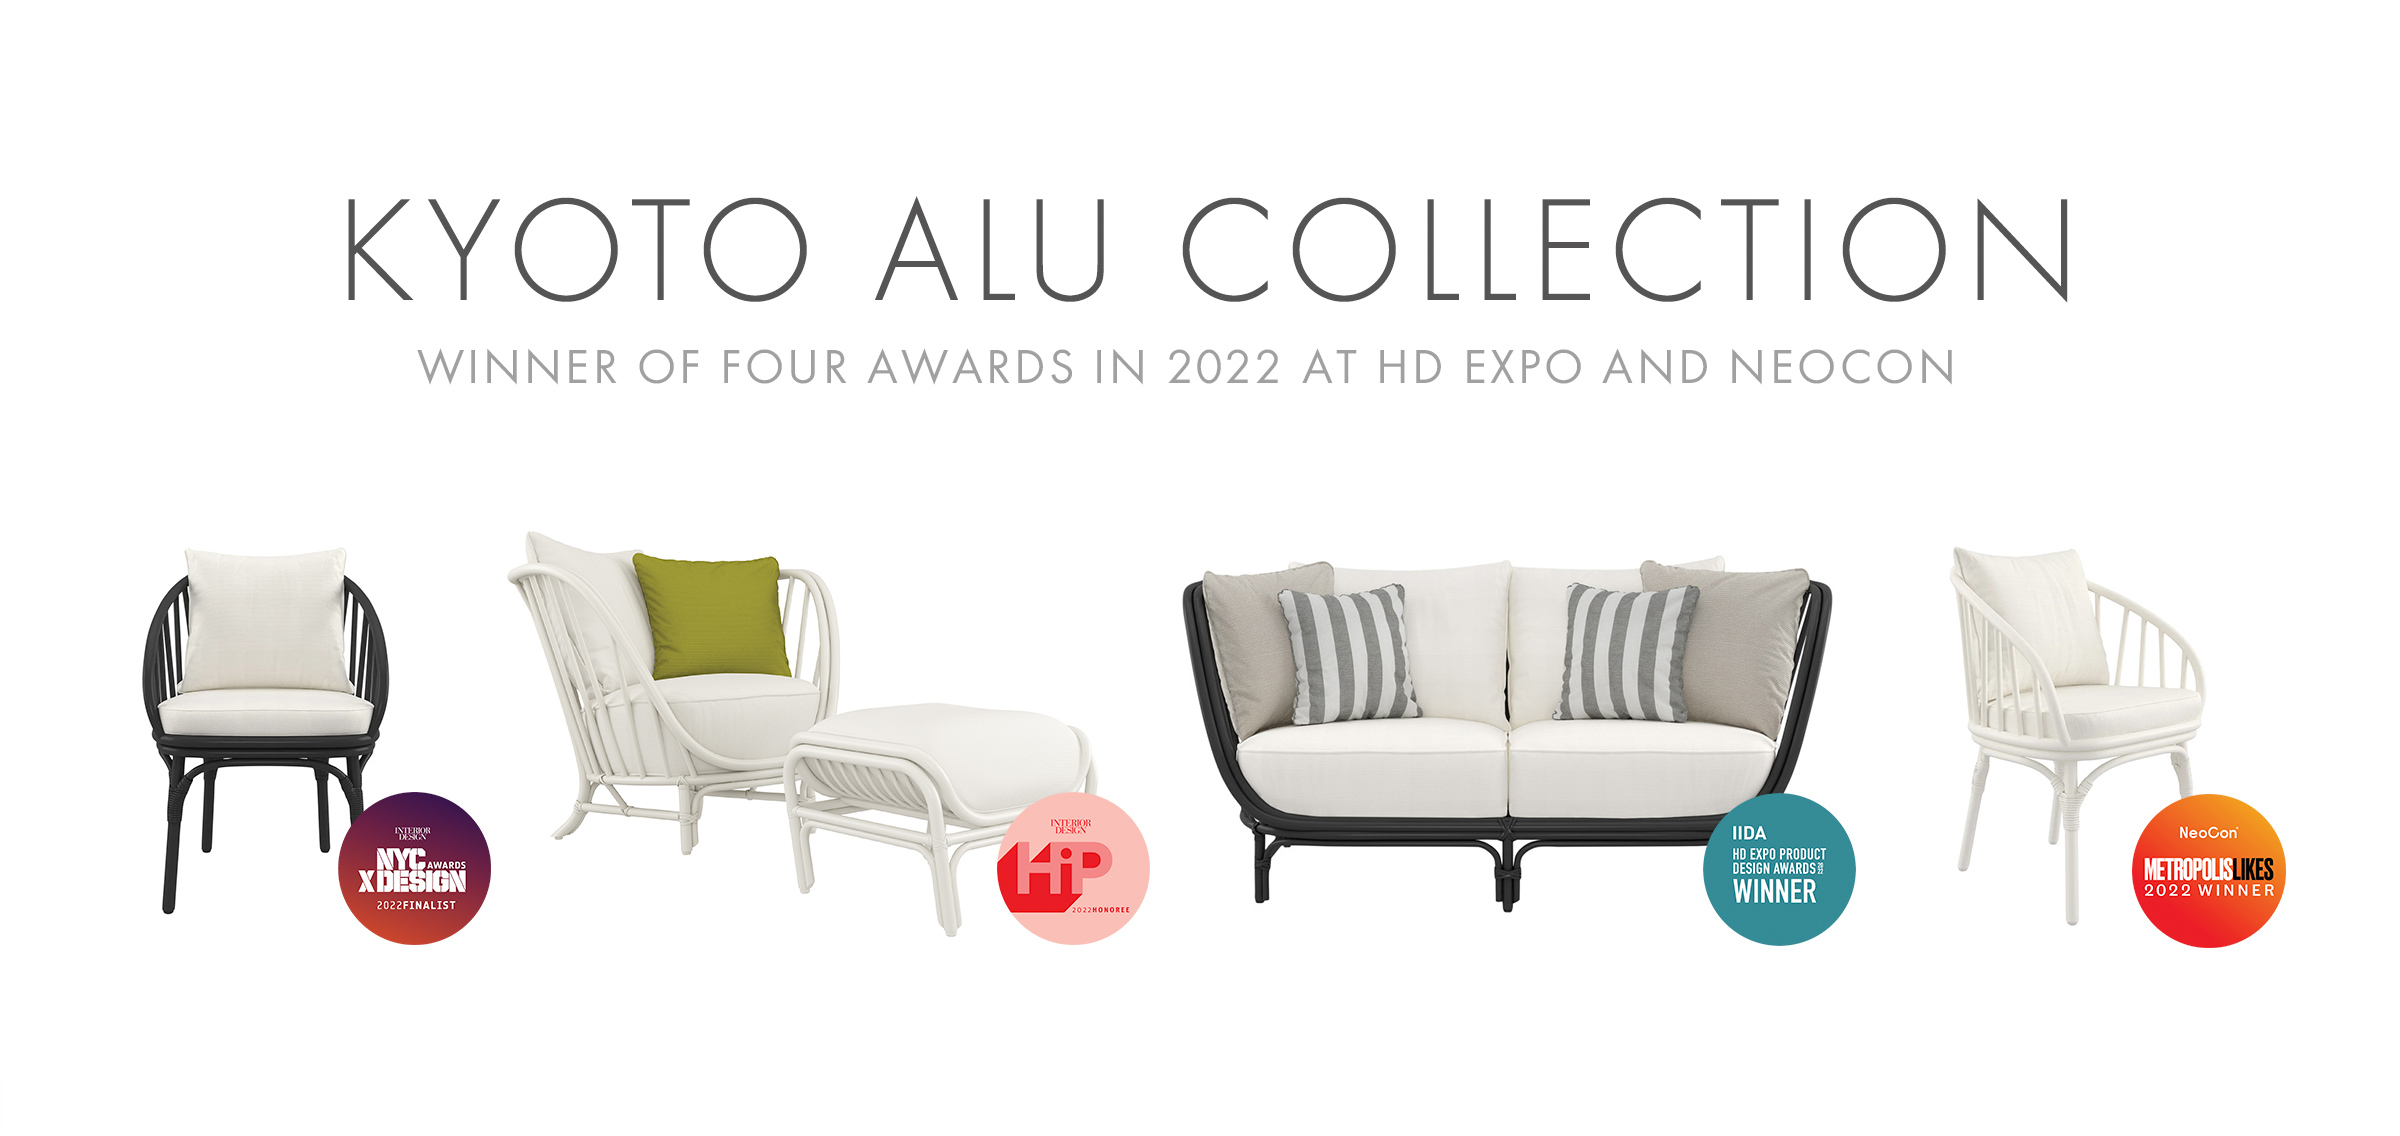 CLICK TO EXPLORE THE AWARD-WINNING KYOTO ALU COLLECTION